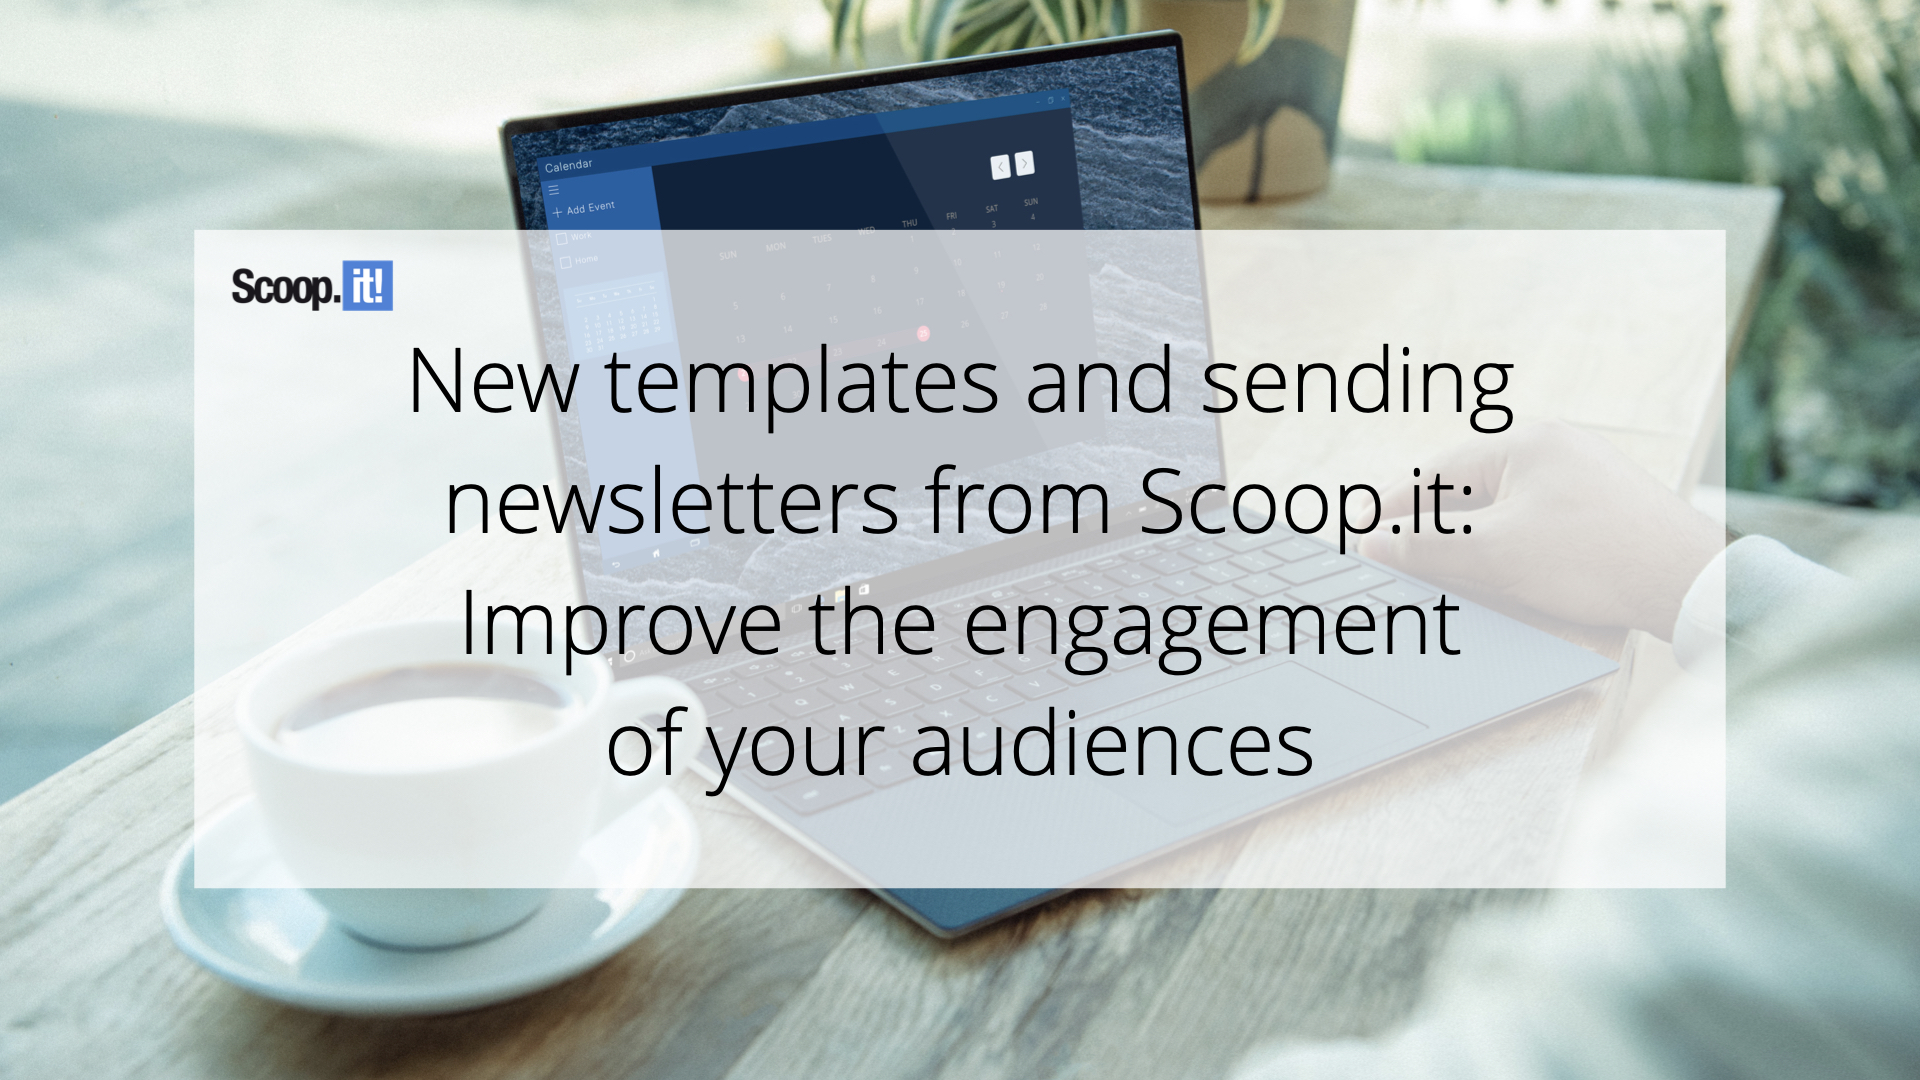 New templates and sending newsletters from Scoop.it: improve the engagement of your audiences